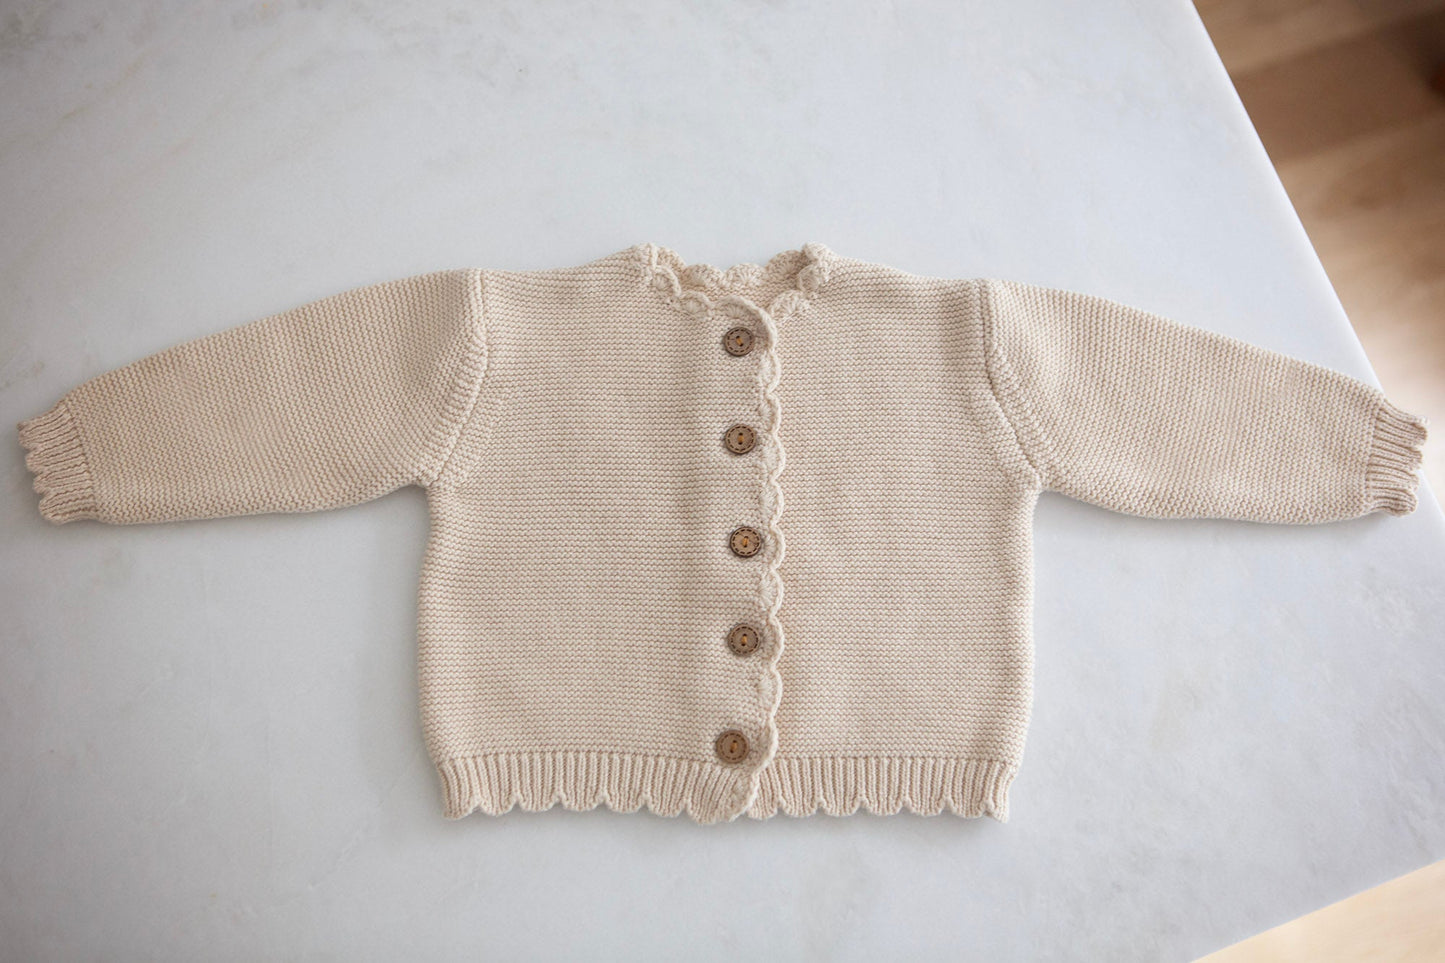 Baby Girl Cardigan Sweater with scalloped details - Cheerful Lane